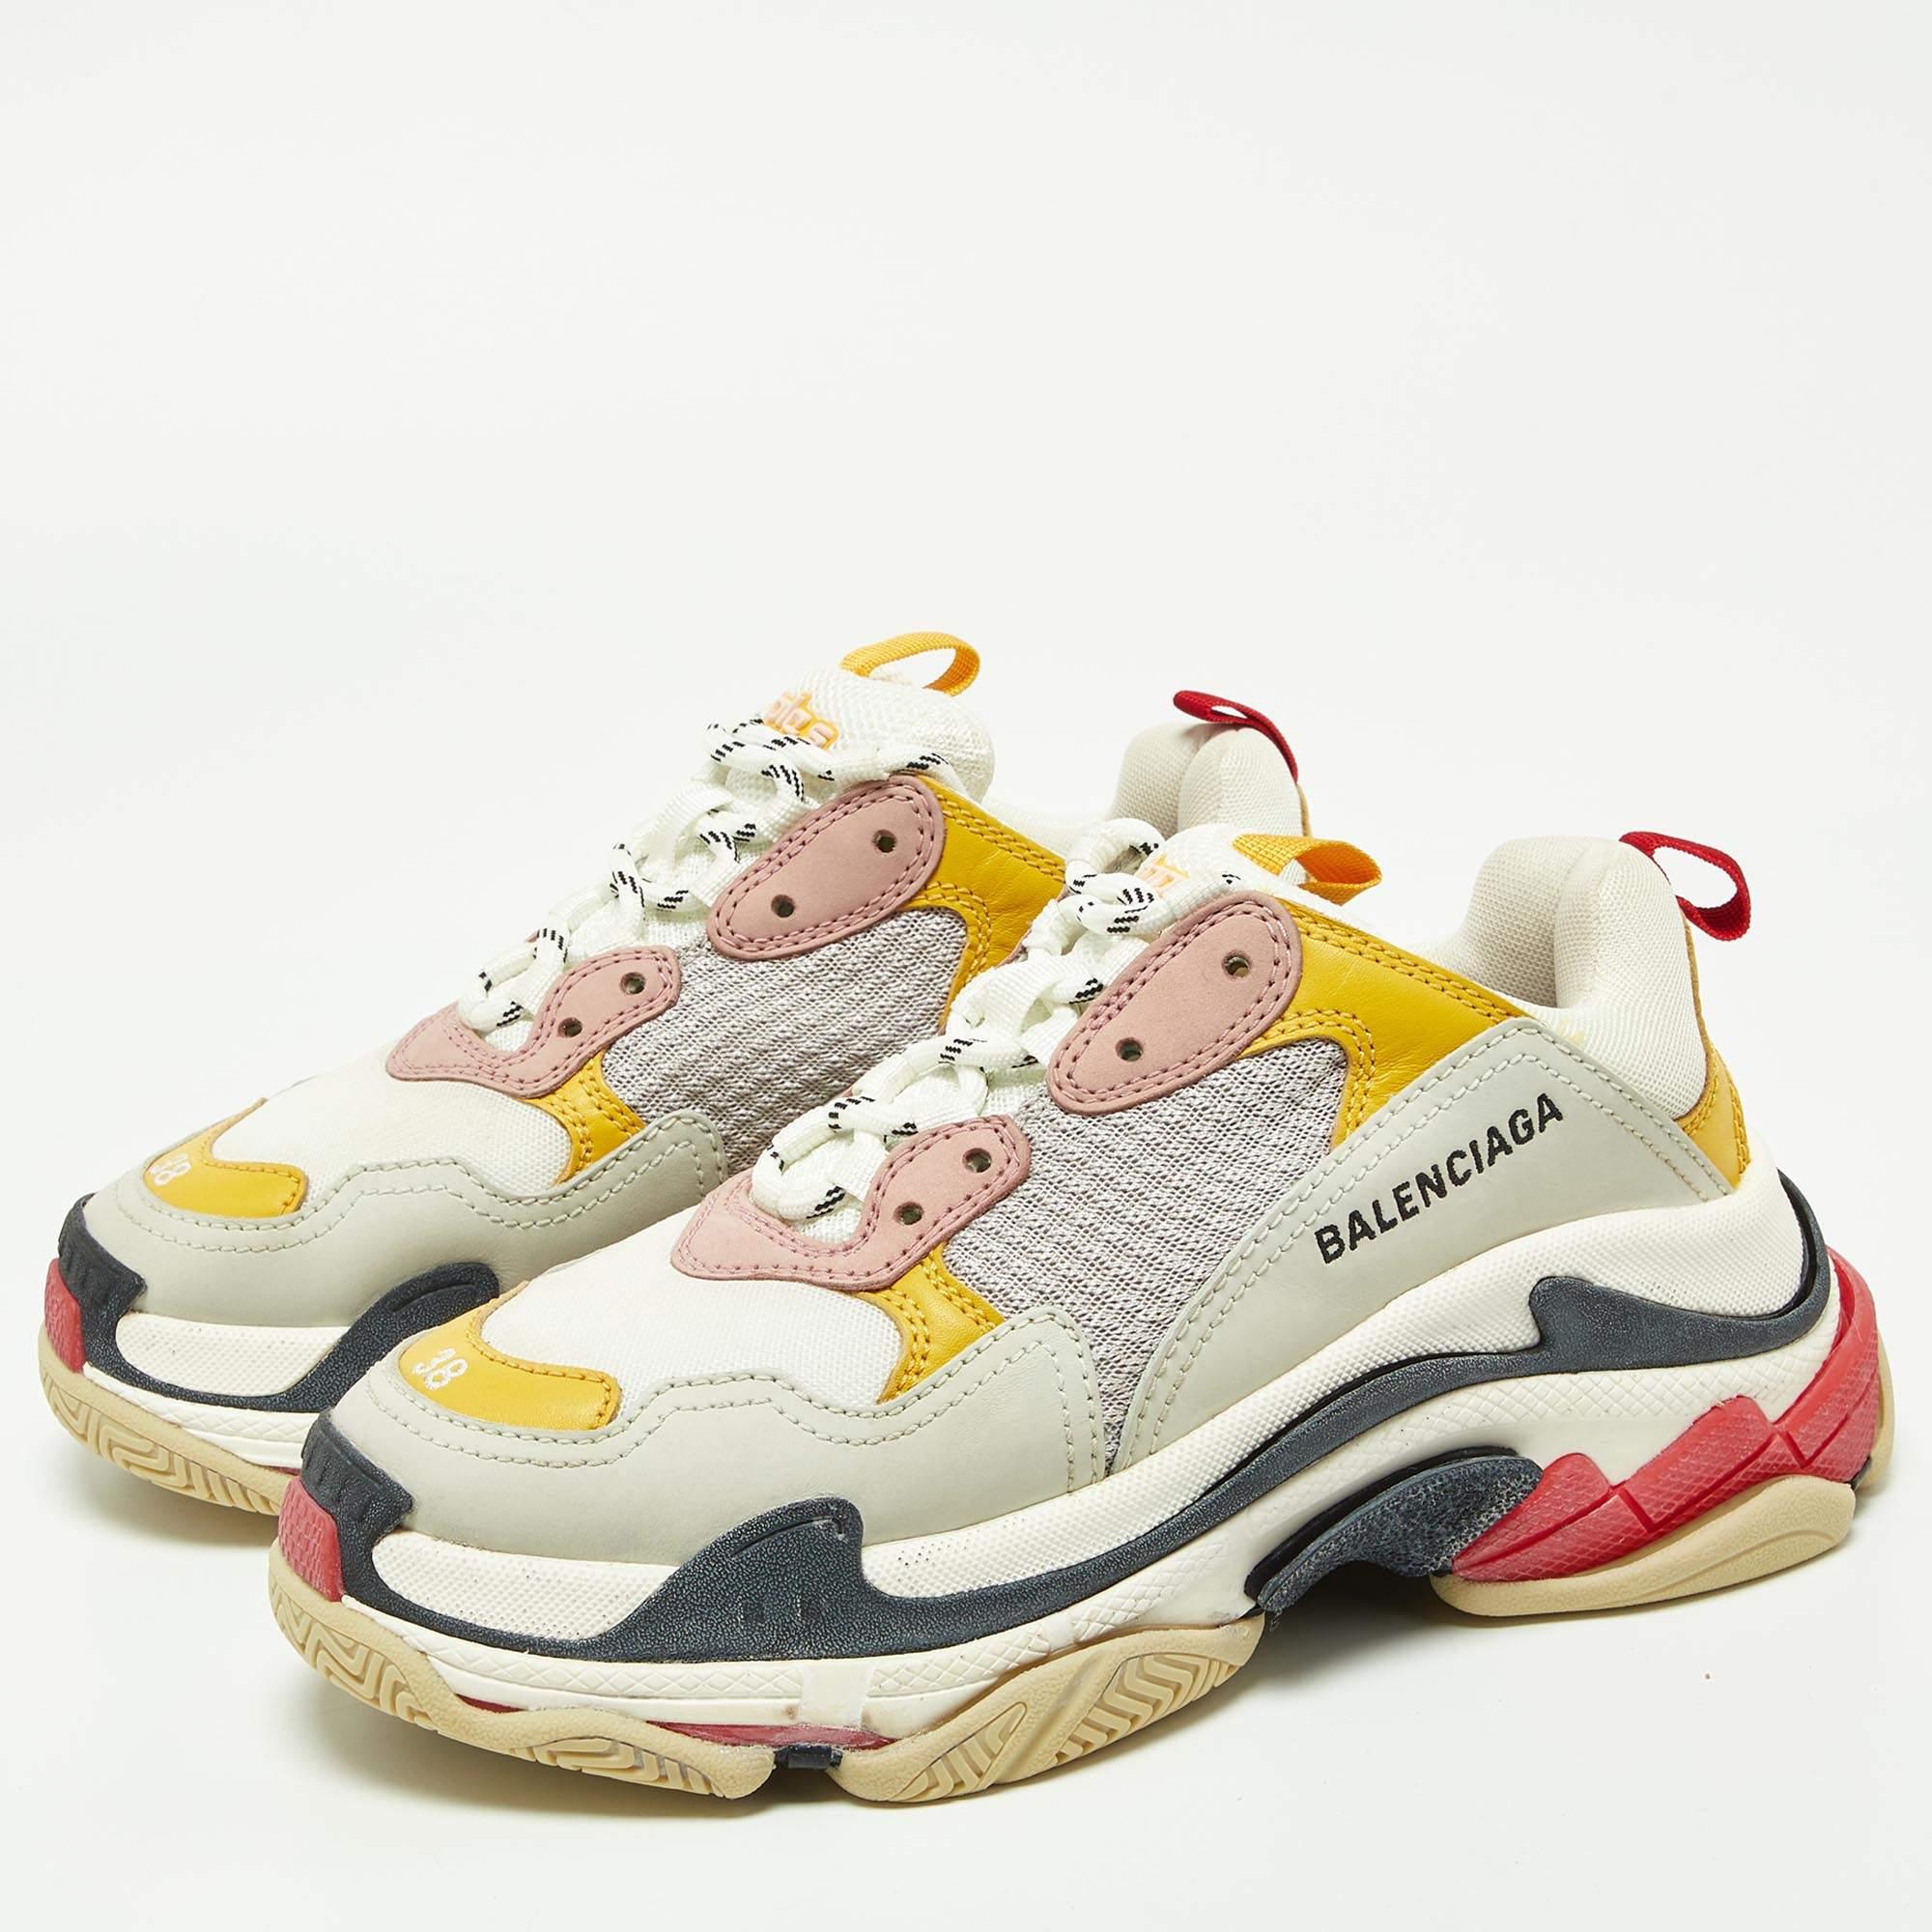 Coming in a classic silhouette, these Balenciaga Triple S sneakers are a seamless combination of luxury, comfort, and style. These sneakers are finished with signature details and comfortable insoles.

